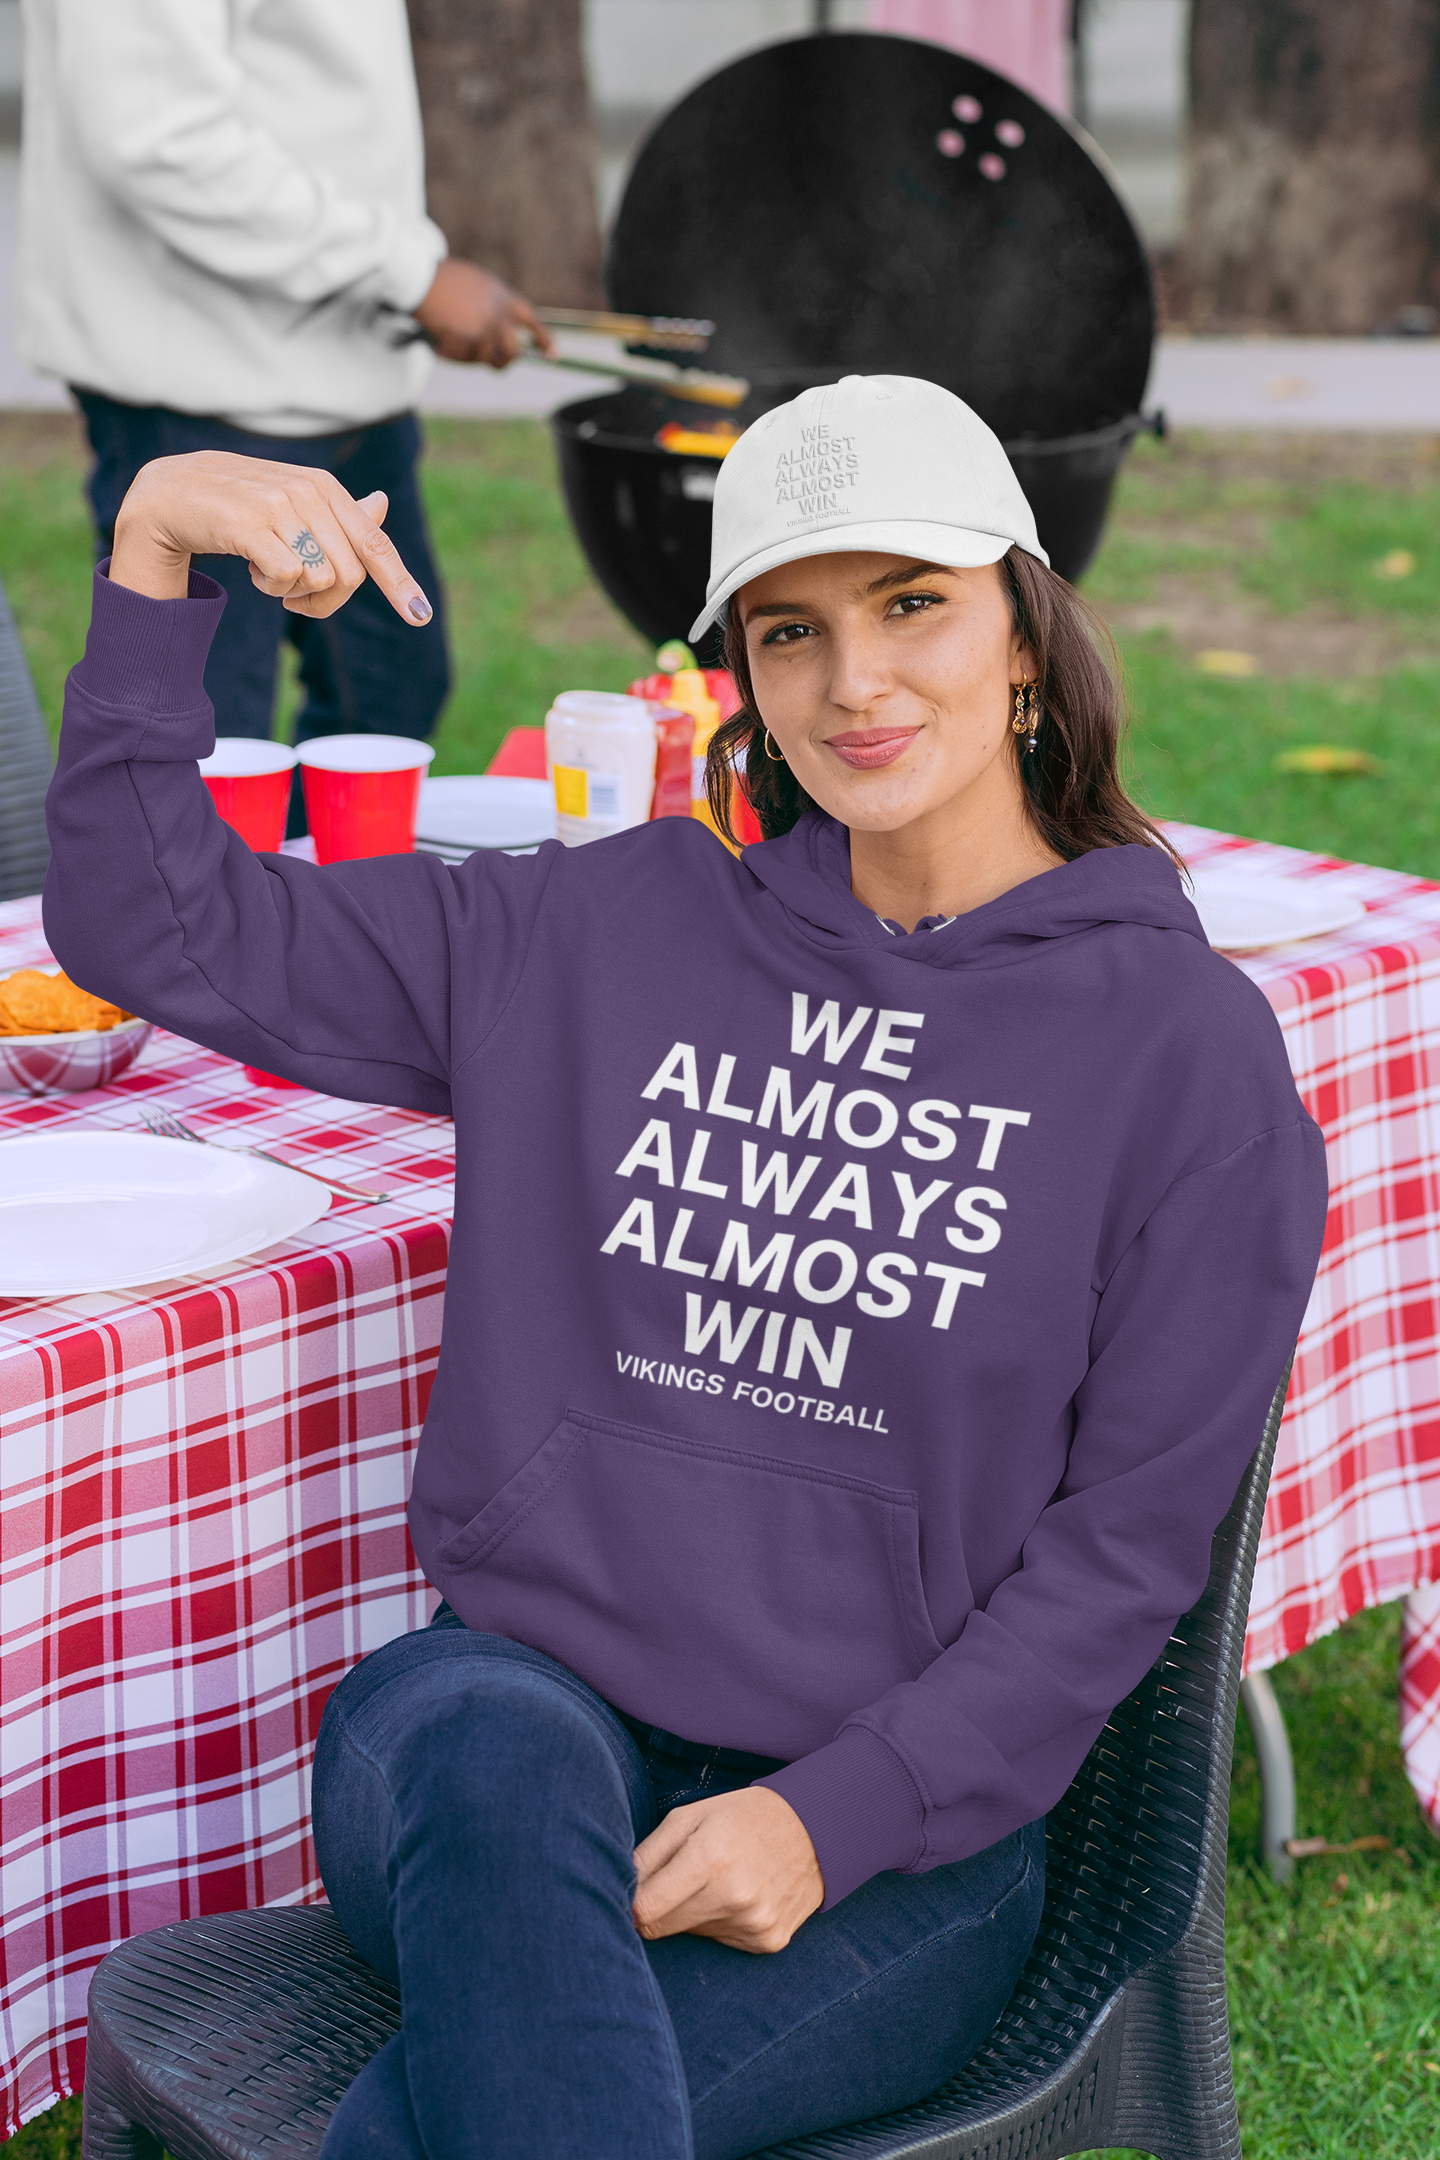 We Almost Always Almost Win Vikings Football Hooded Sweatshirt in purple with white writing. This is the front view of the sweatshirt on a woman model sitting in a backyard bbq scene pointing to her sweatshirt with a white hat on.